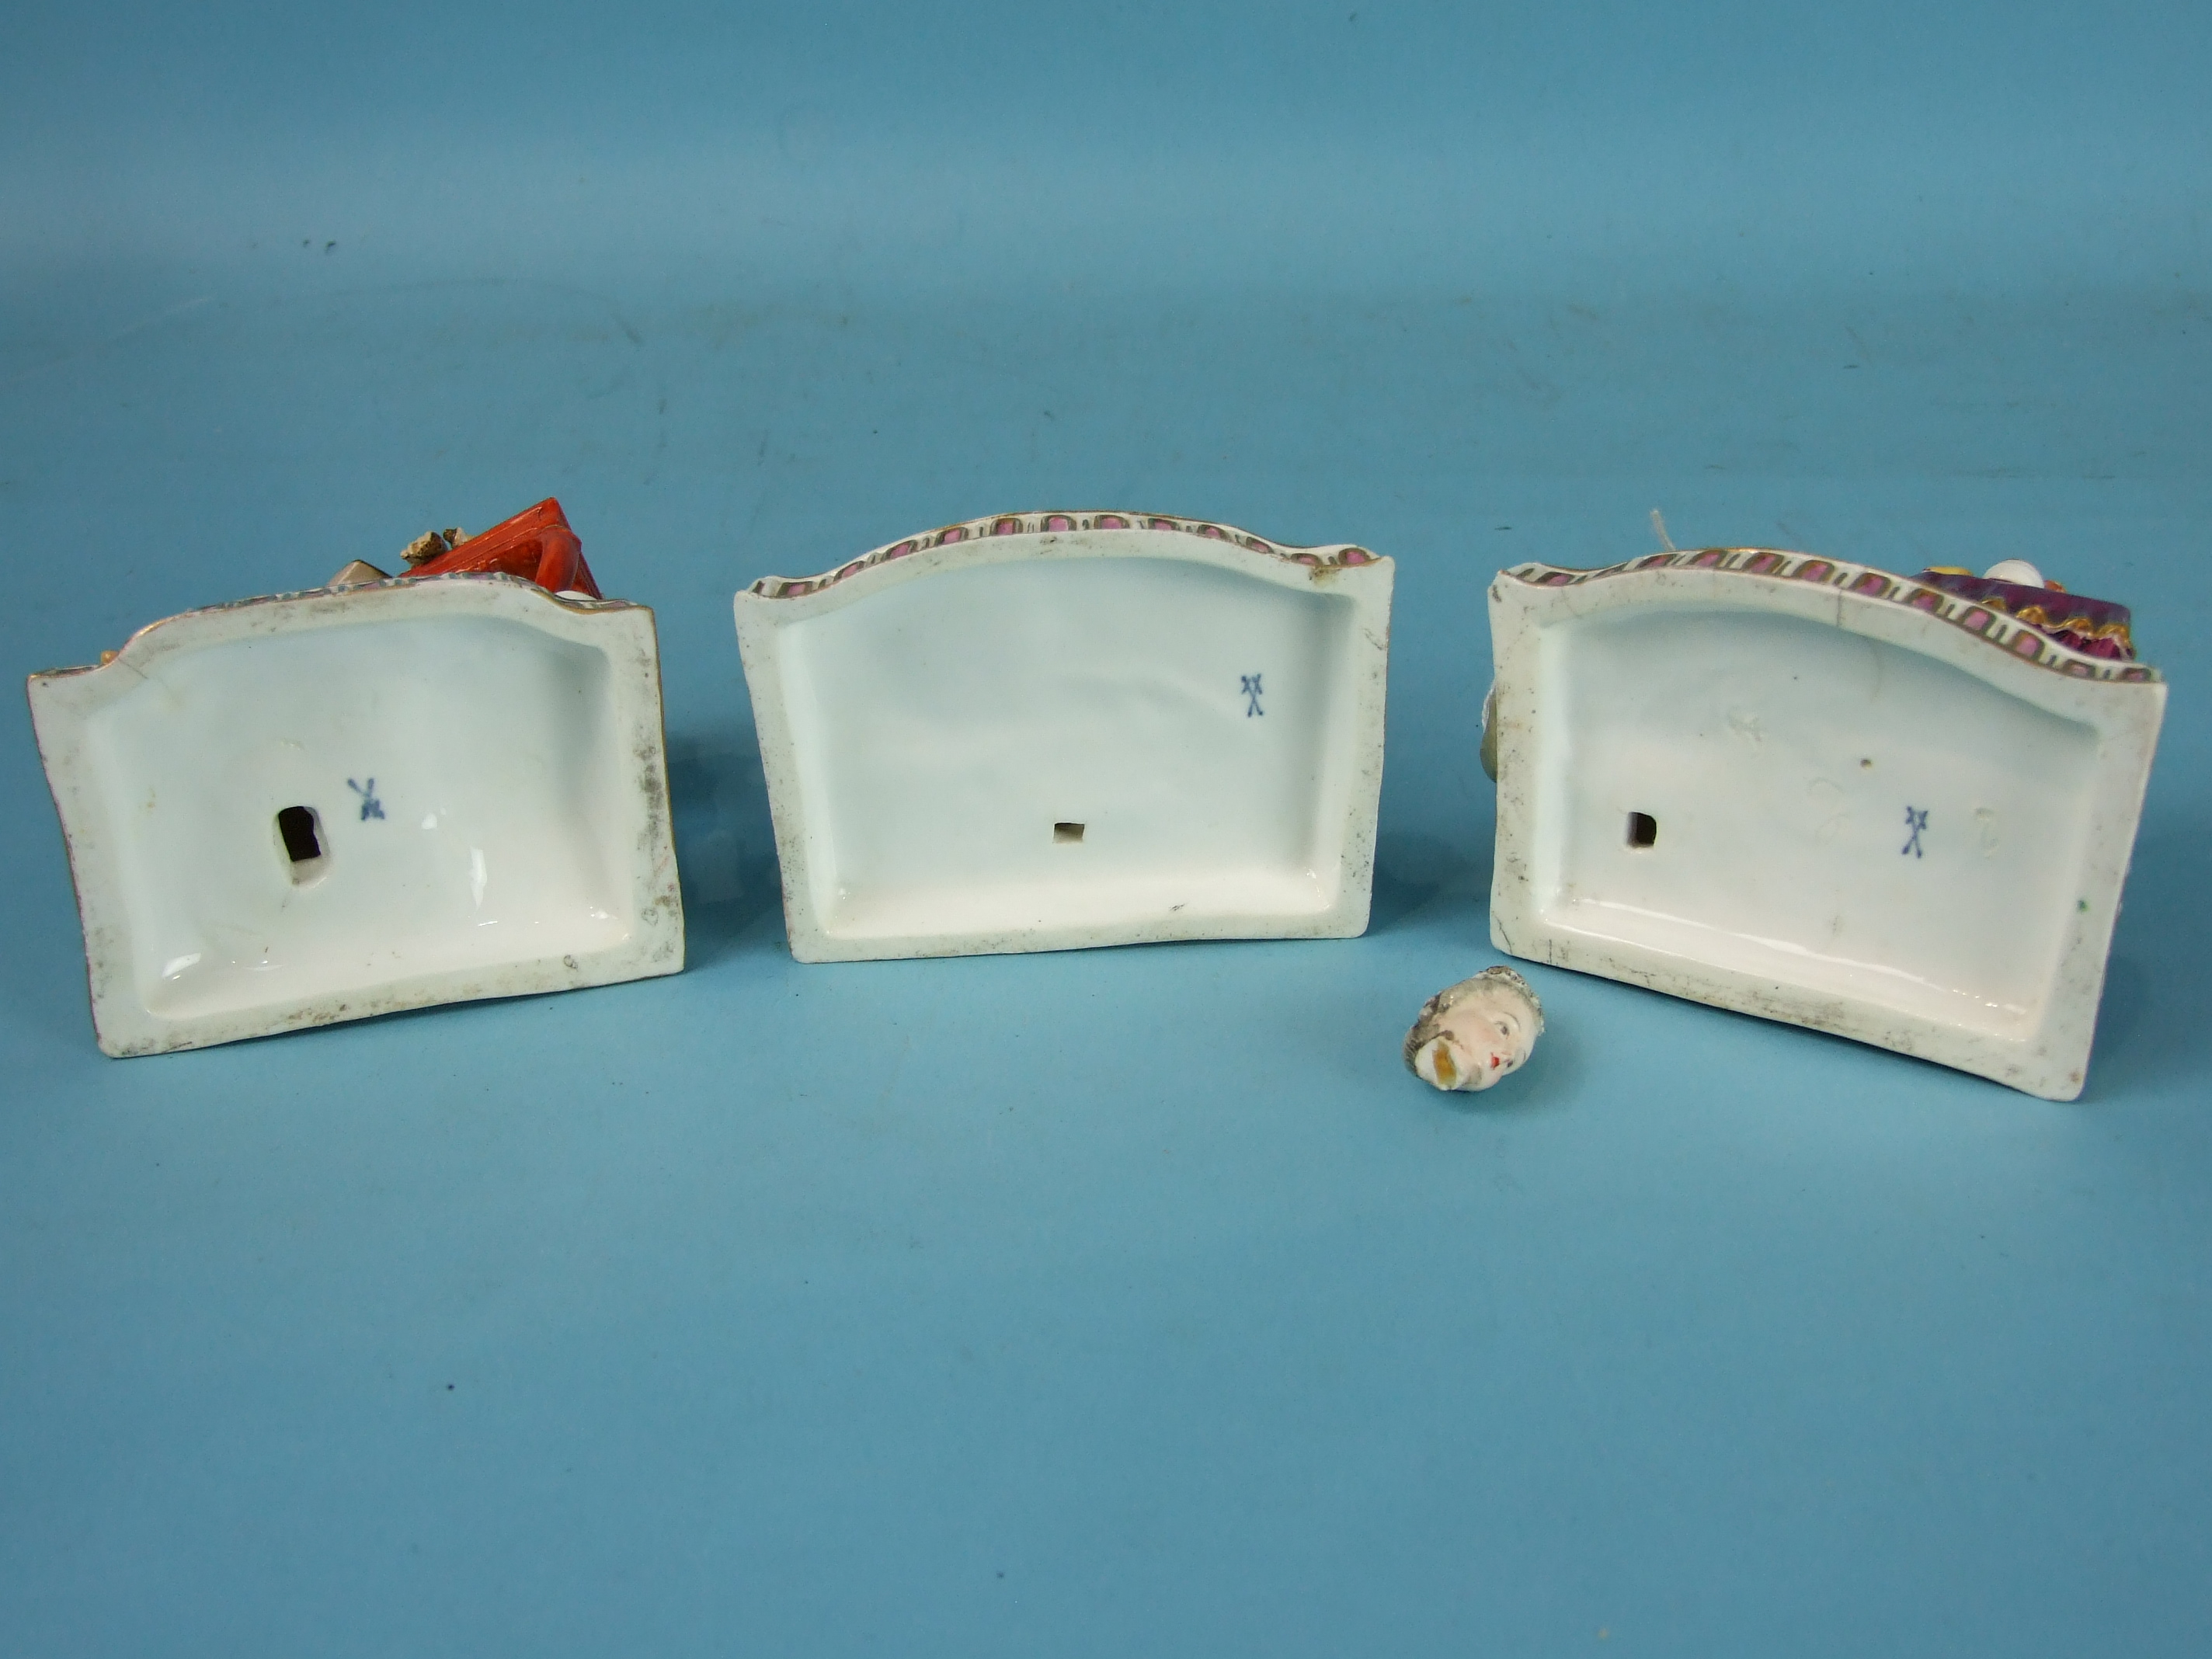 A set of three English porcelain models of the senses after the Meissen originals by Acier, probably - Image 2 of 2